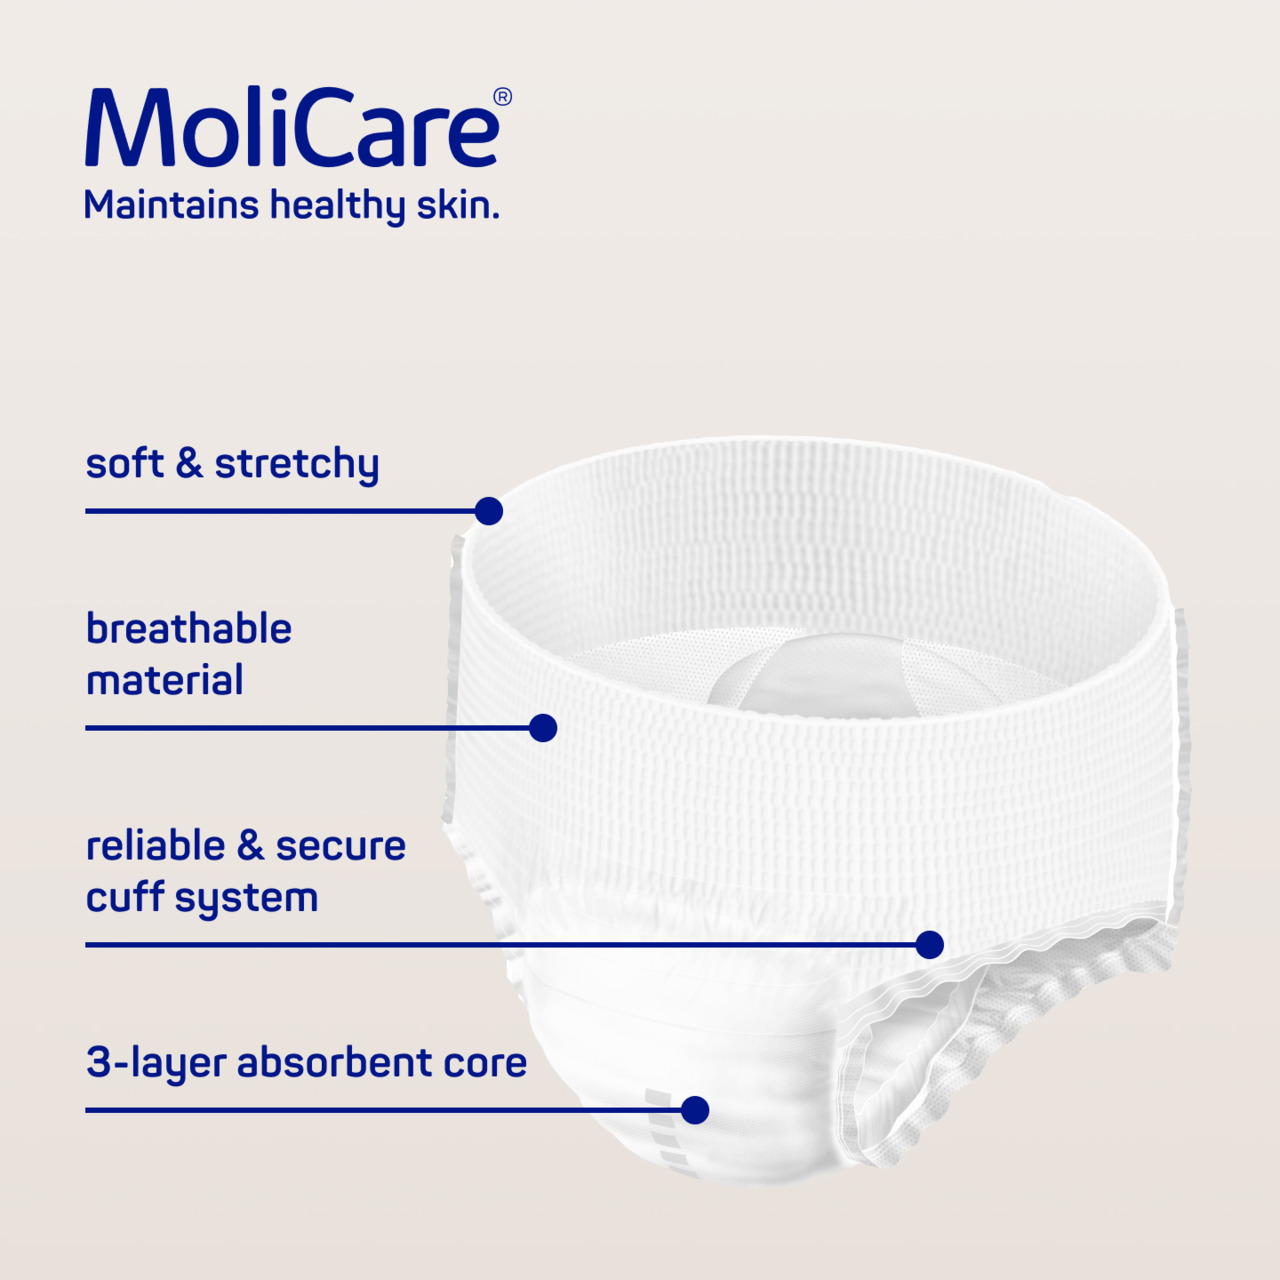 Molicare product features